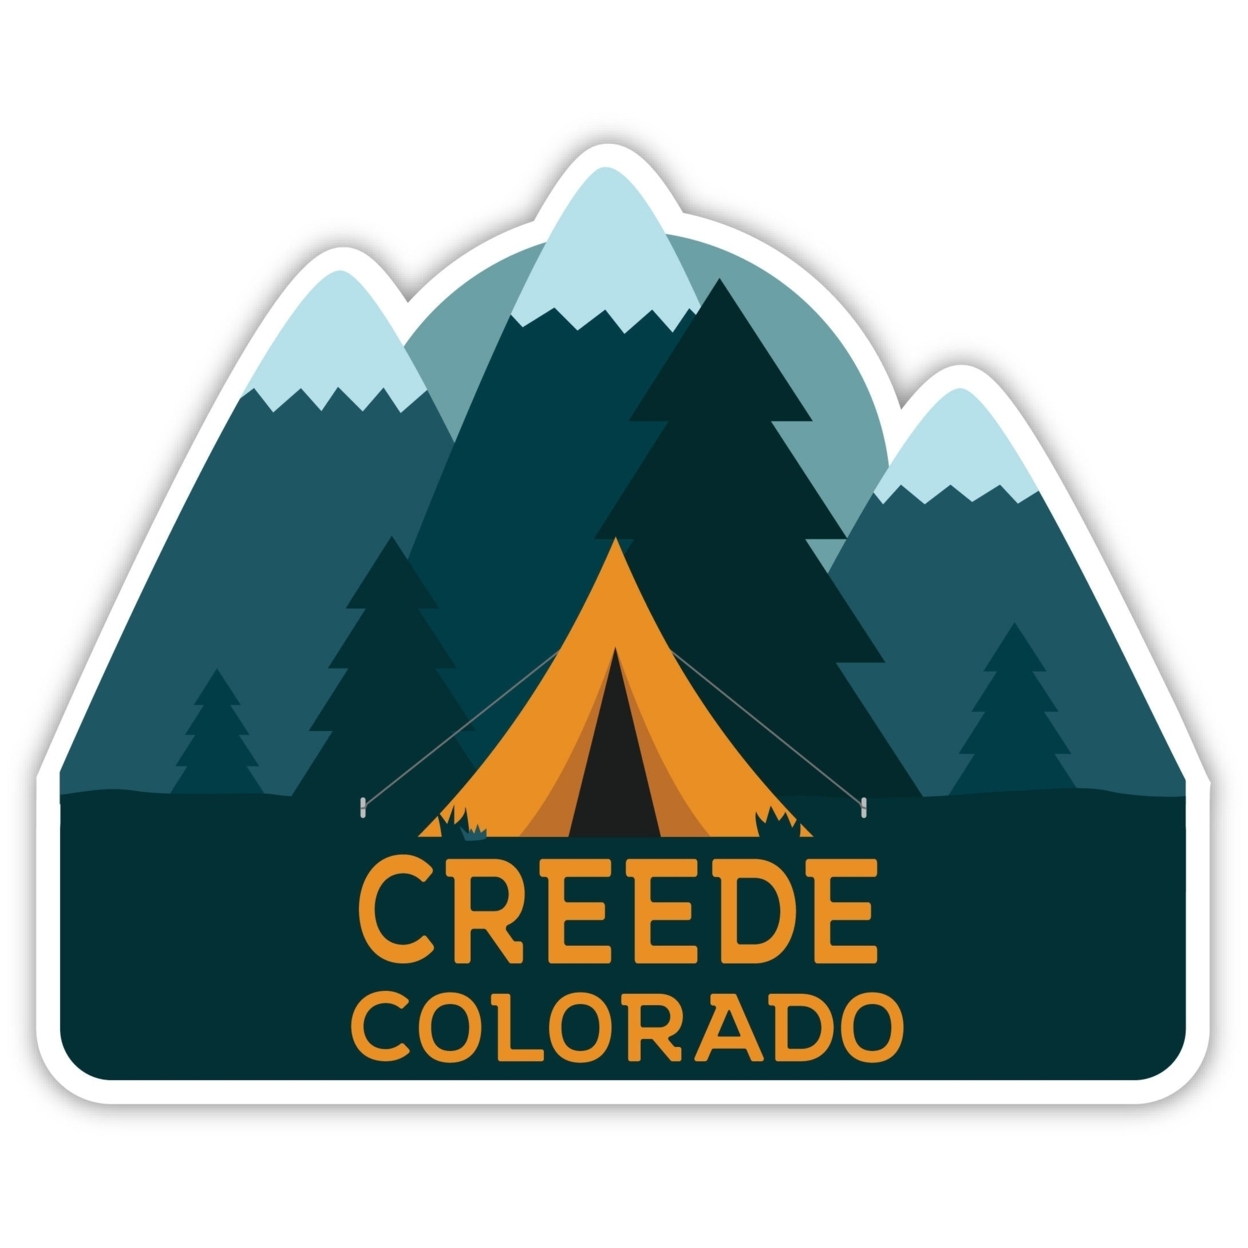 Creede Colorado Souvenir Decorative Stickers (Choose Theme And Size) - 4-Pack, 2-Inch, Bear